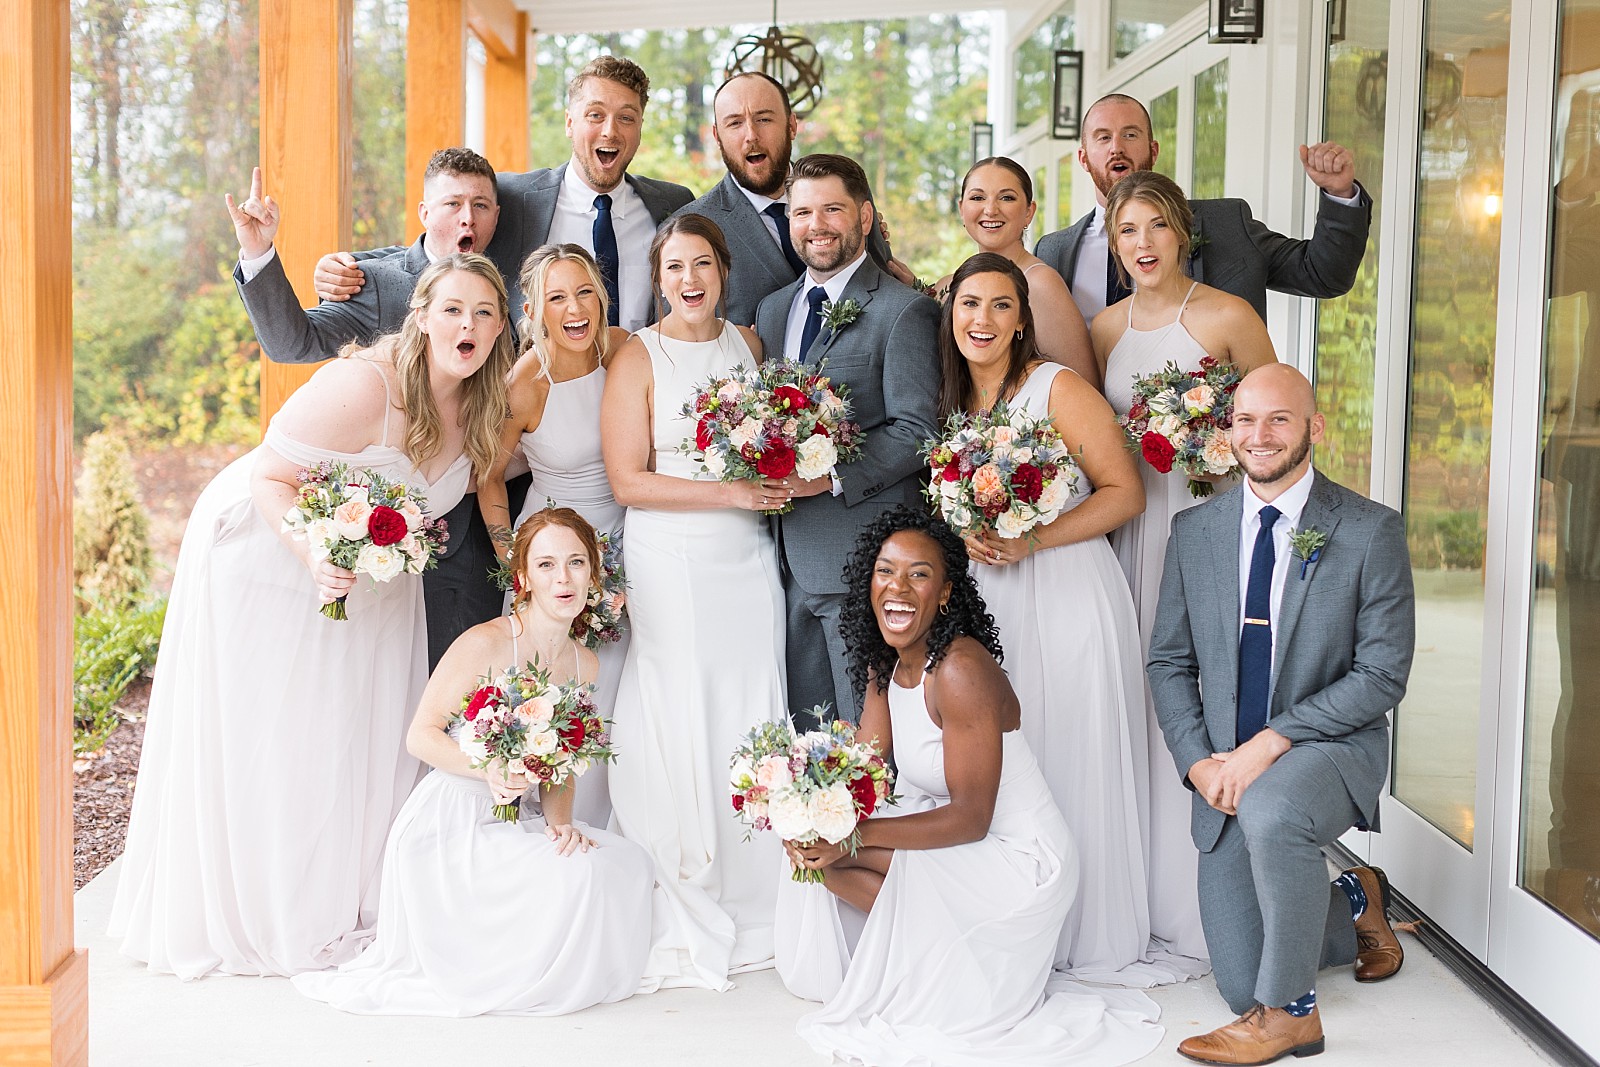 Wedding party at The Upchurch | Raleigh NC Wedding Photography